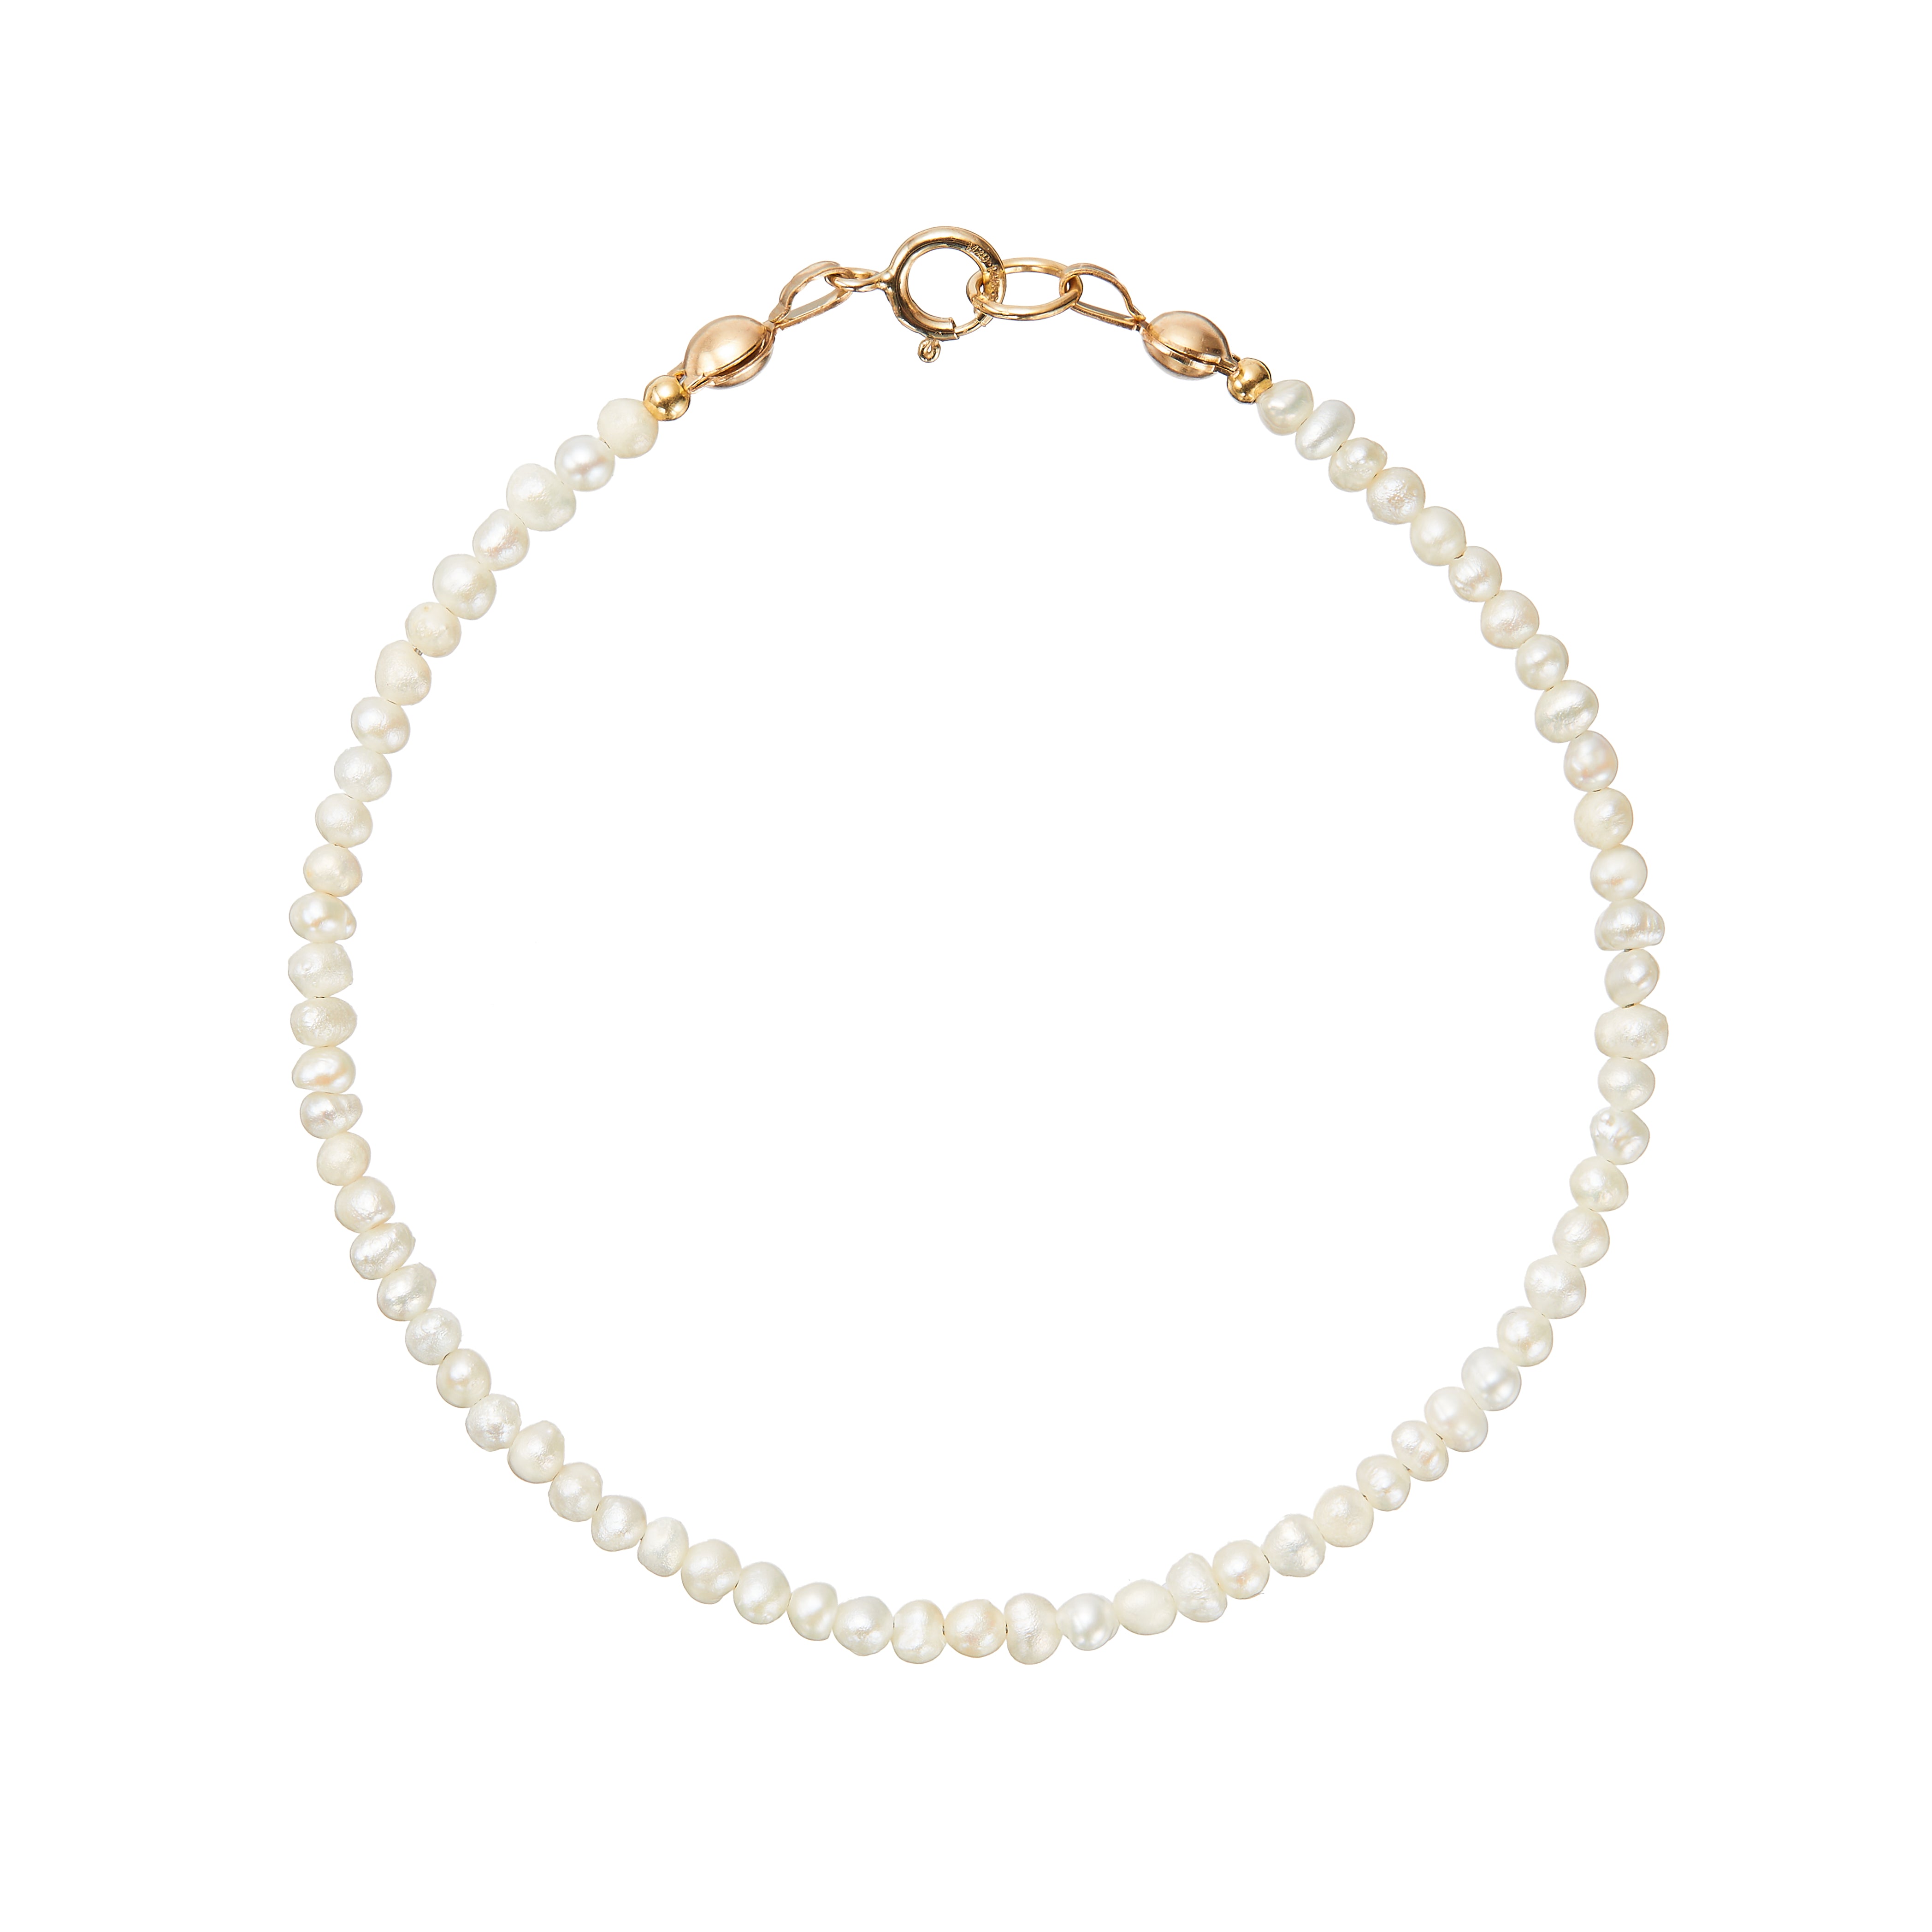 Gold small pearl bracelet on a white background